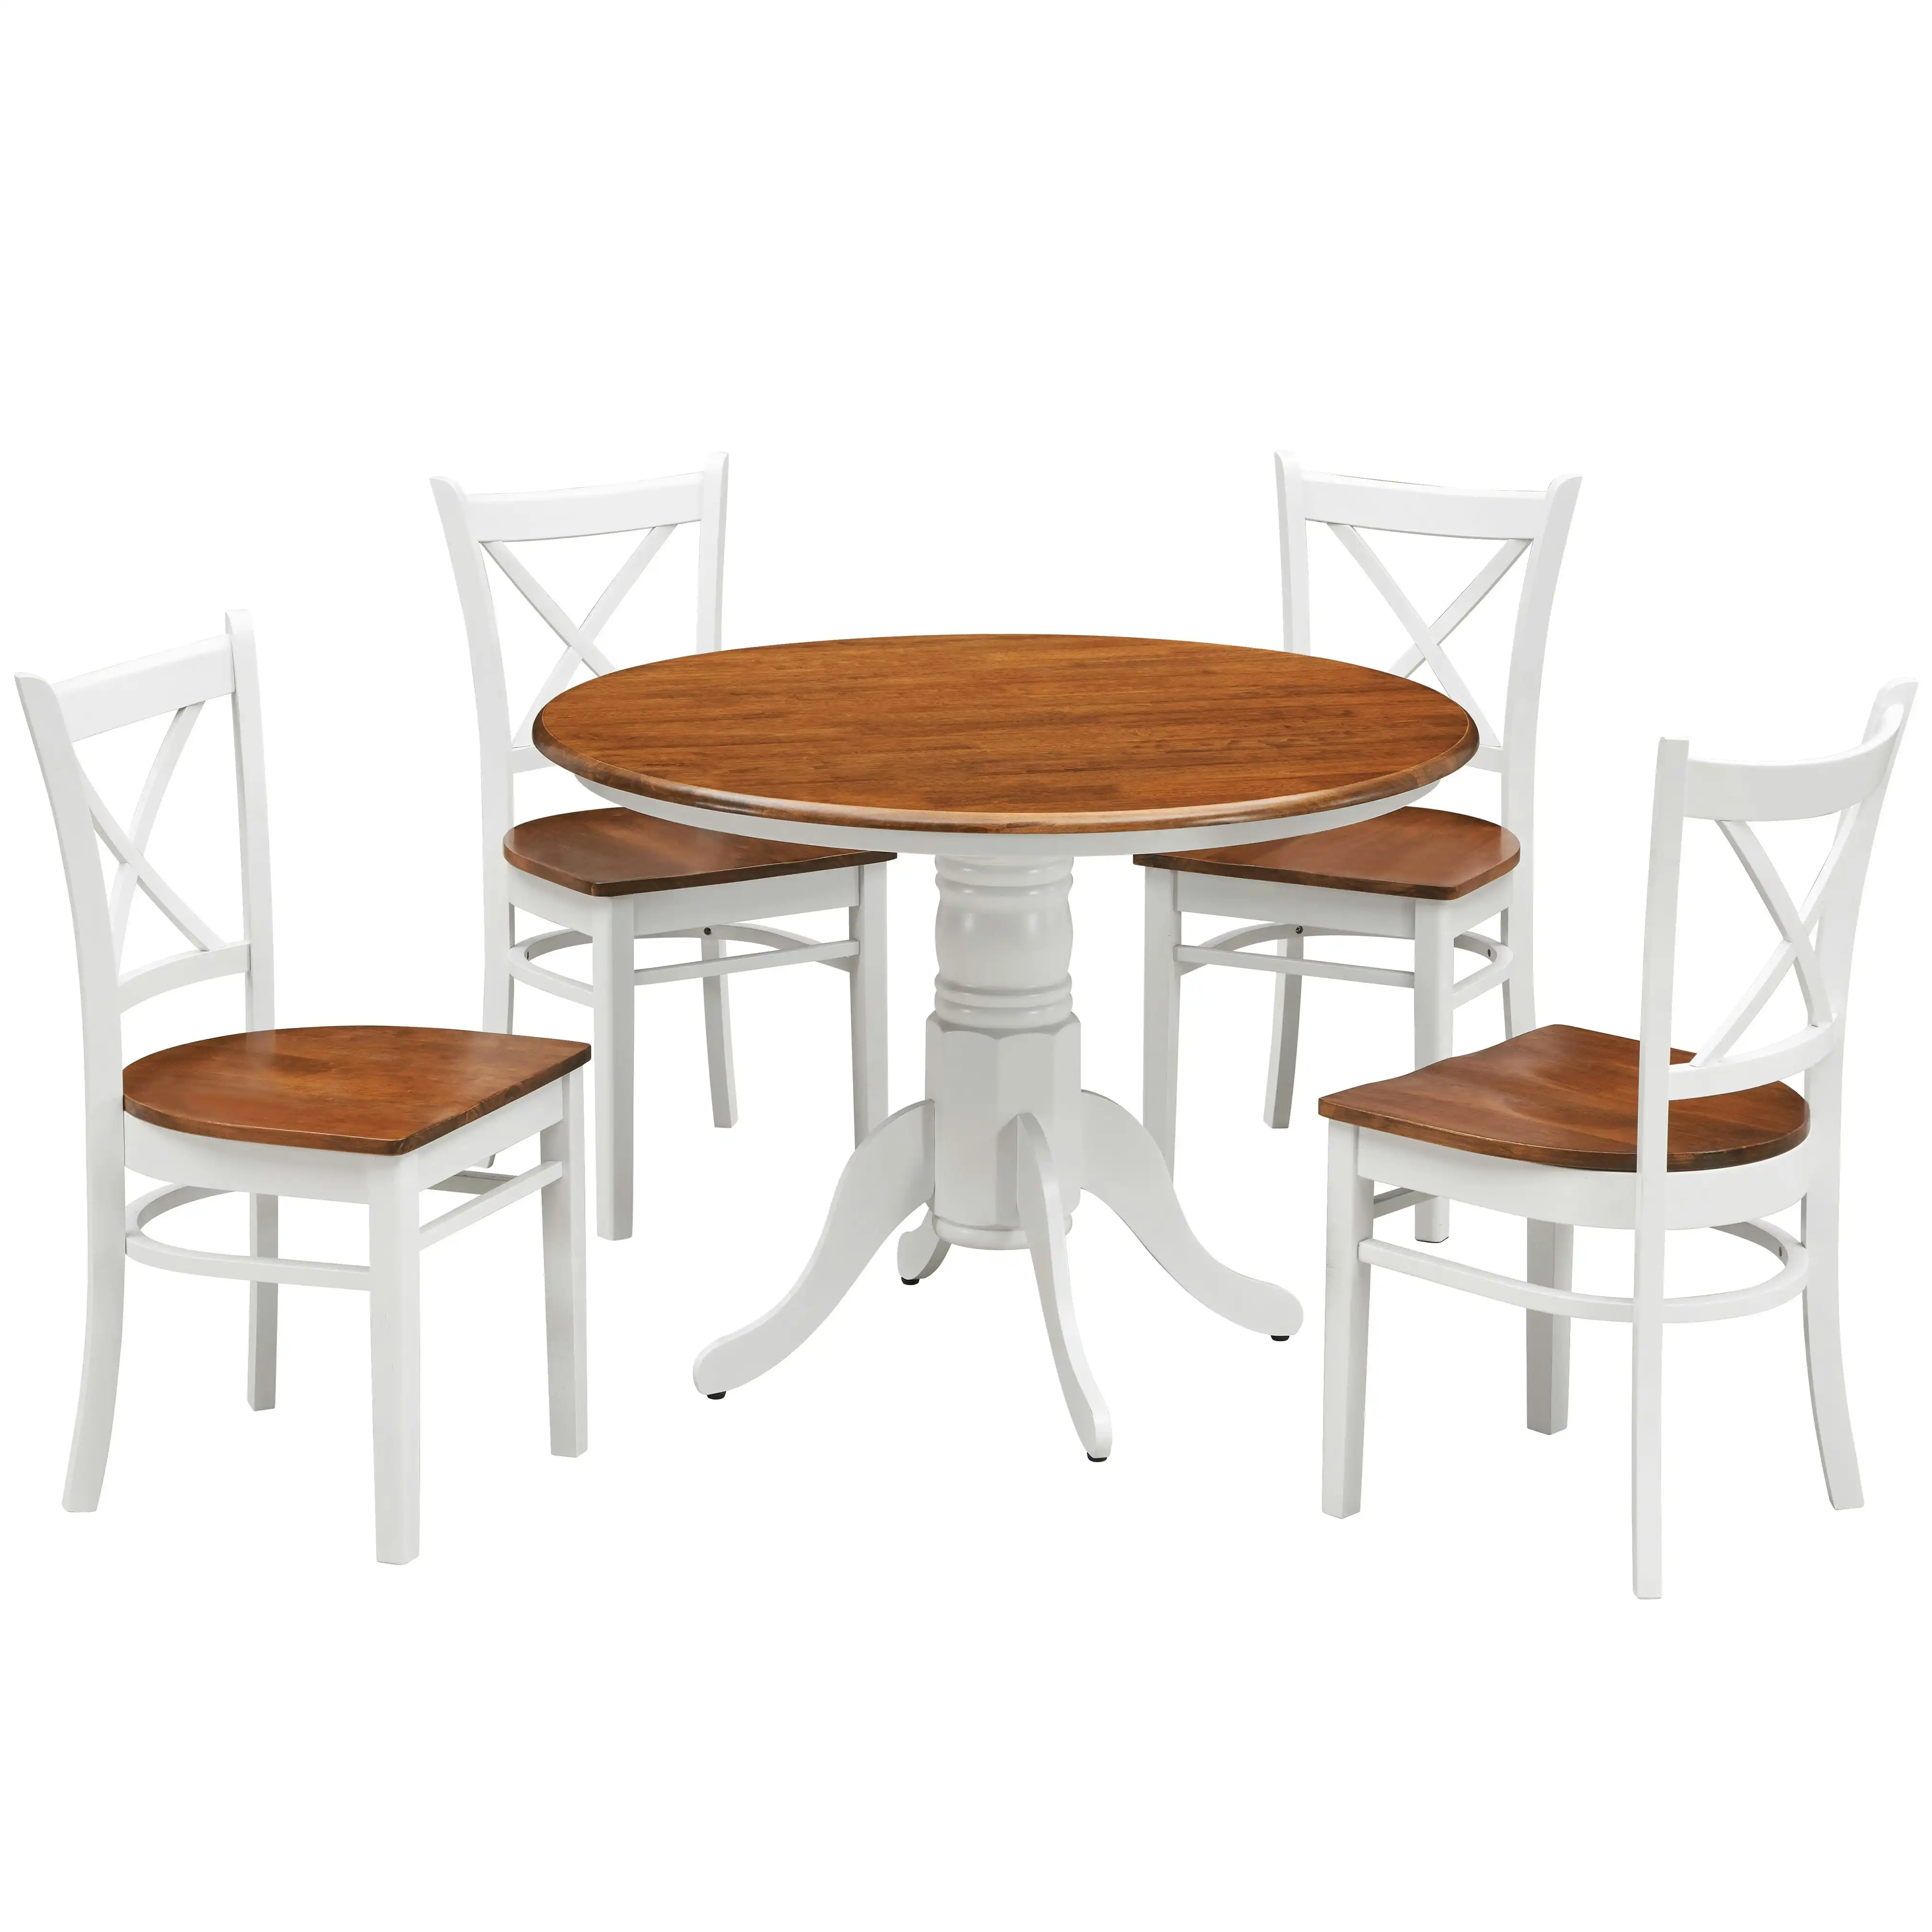 Lupin 5pc Round Dining Table Chair Set